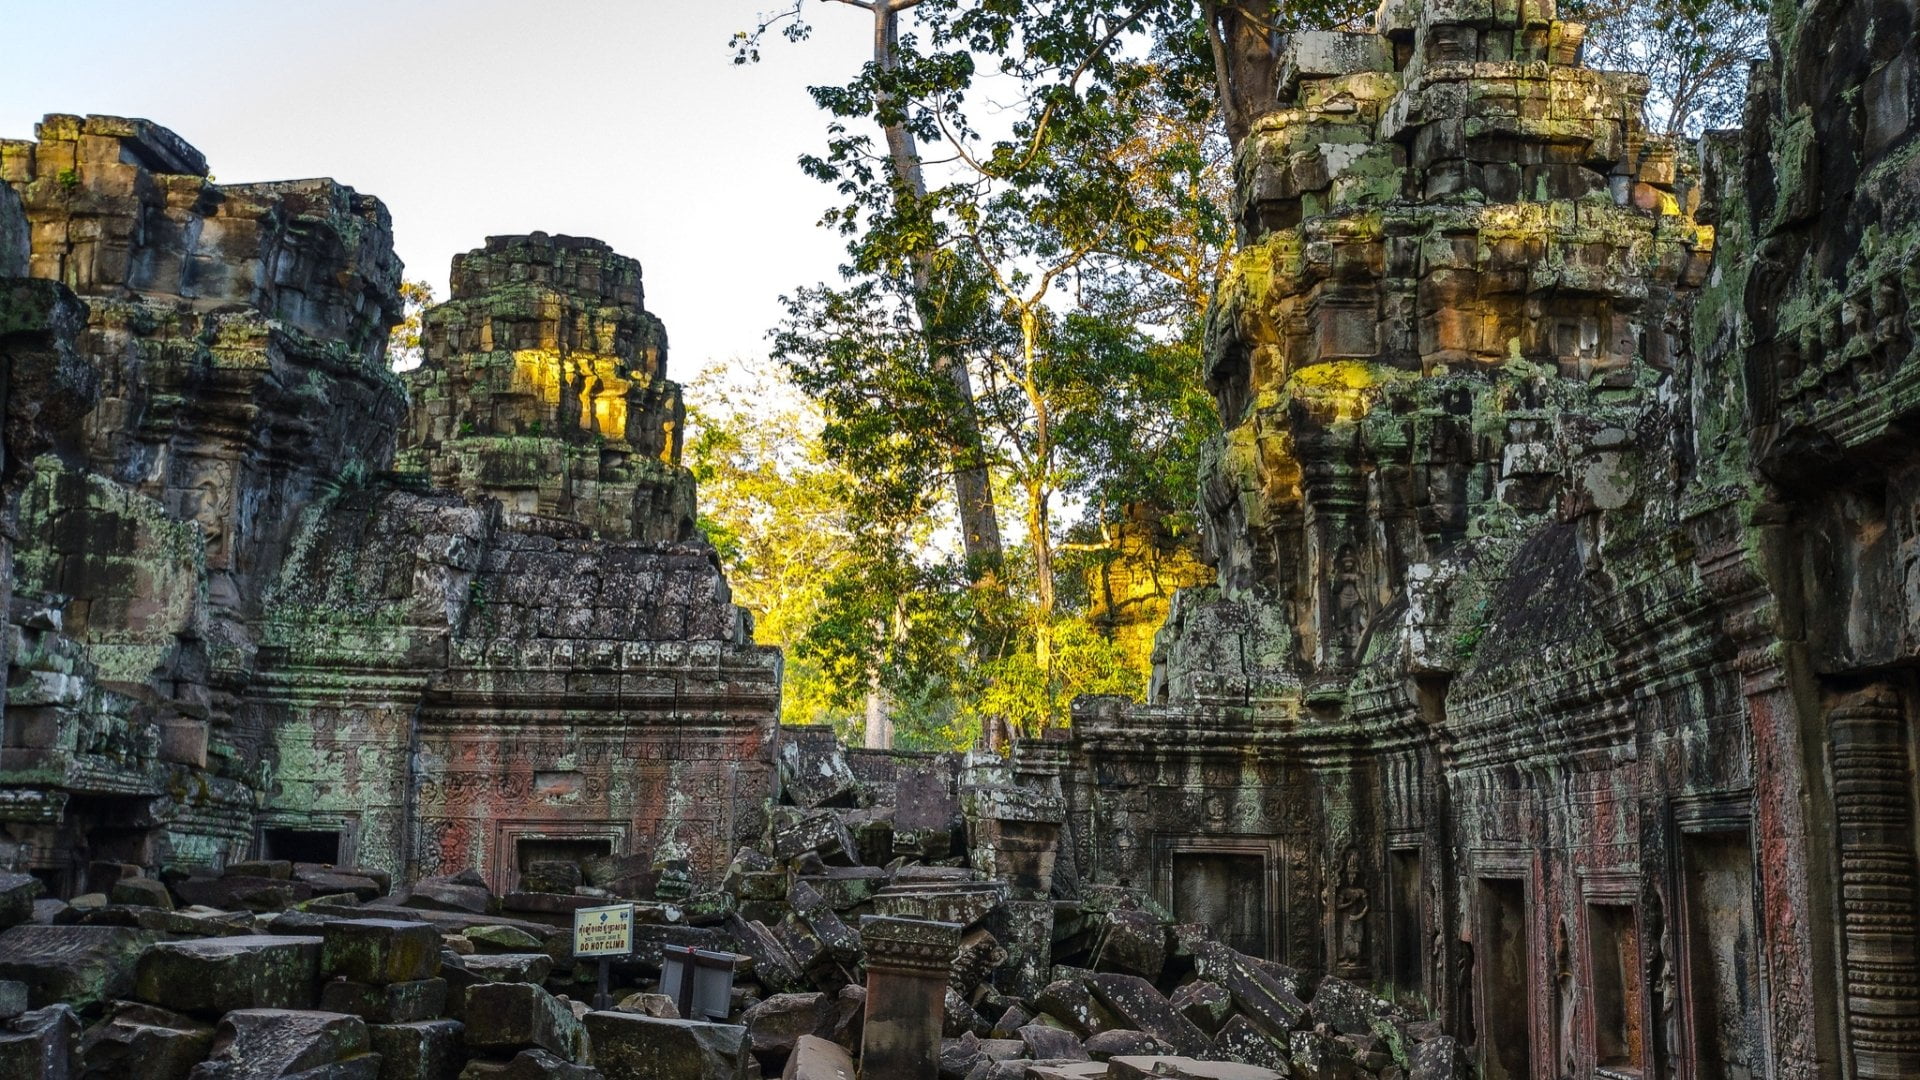 Temples, Angkor Wat, belief, religion, spirituality, built structure